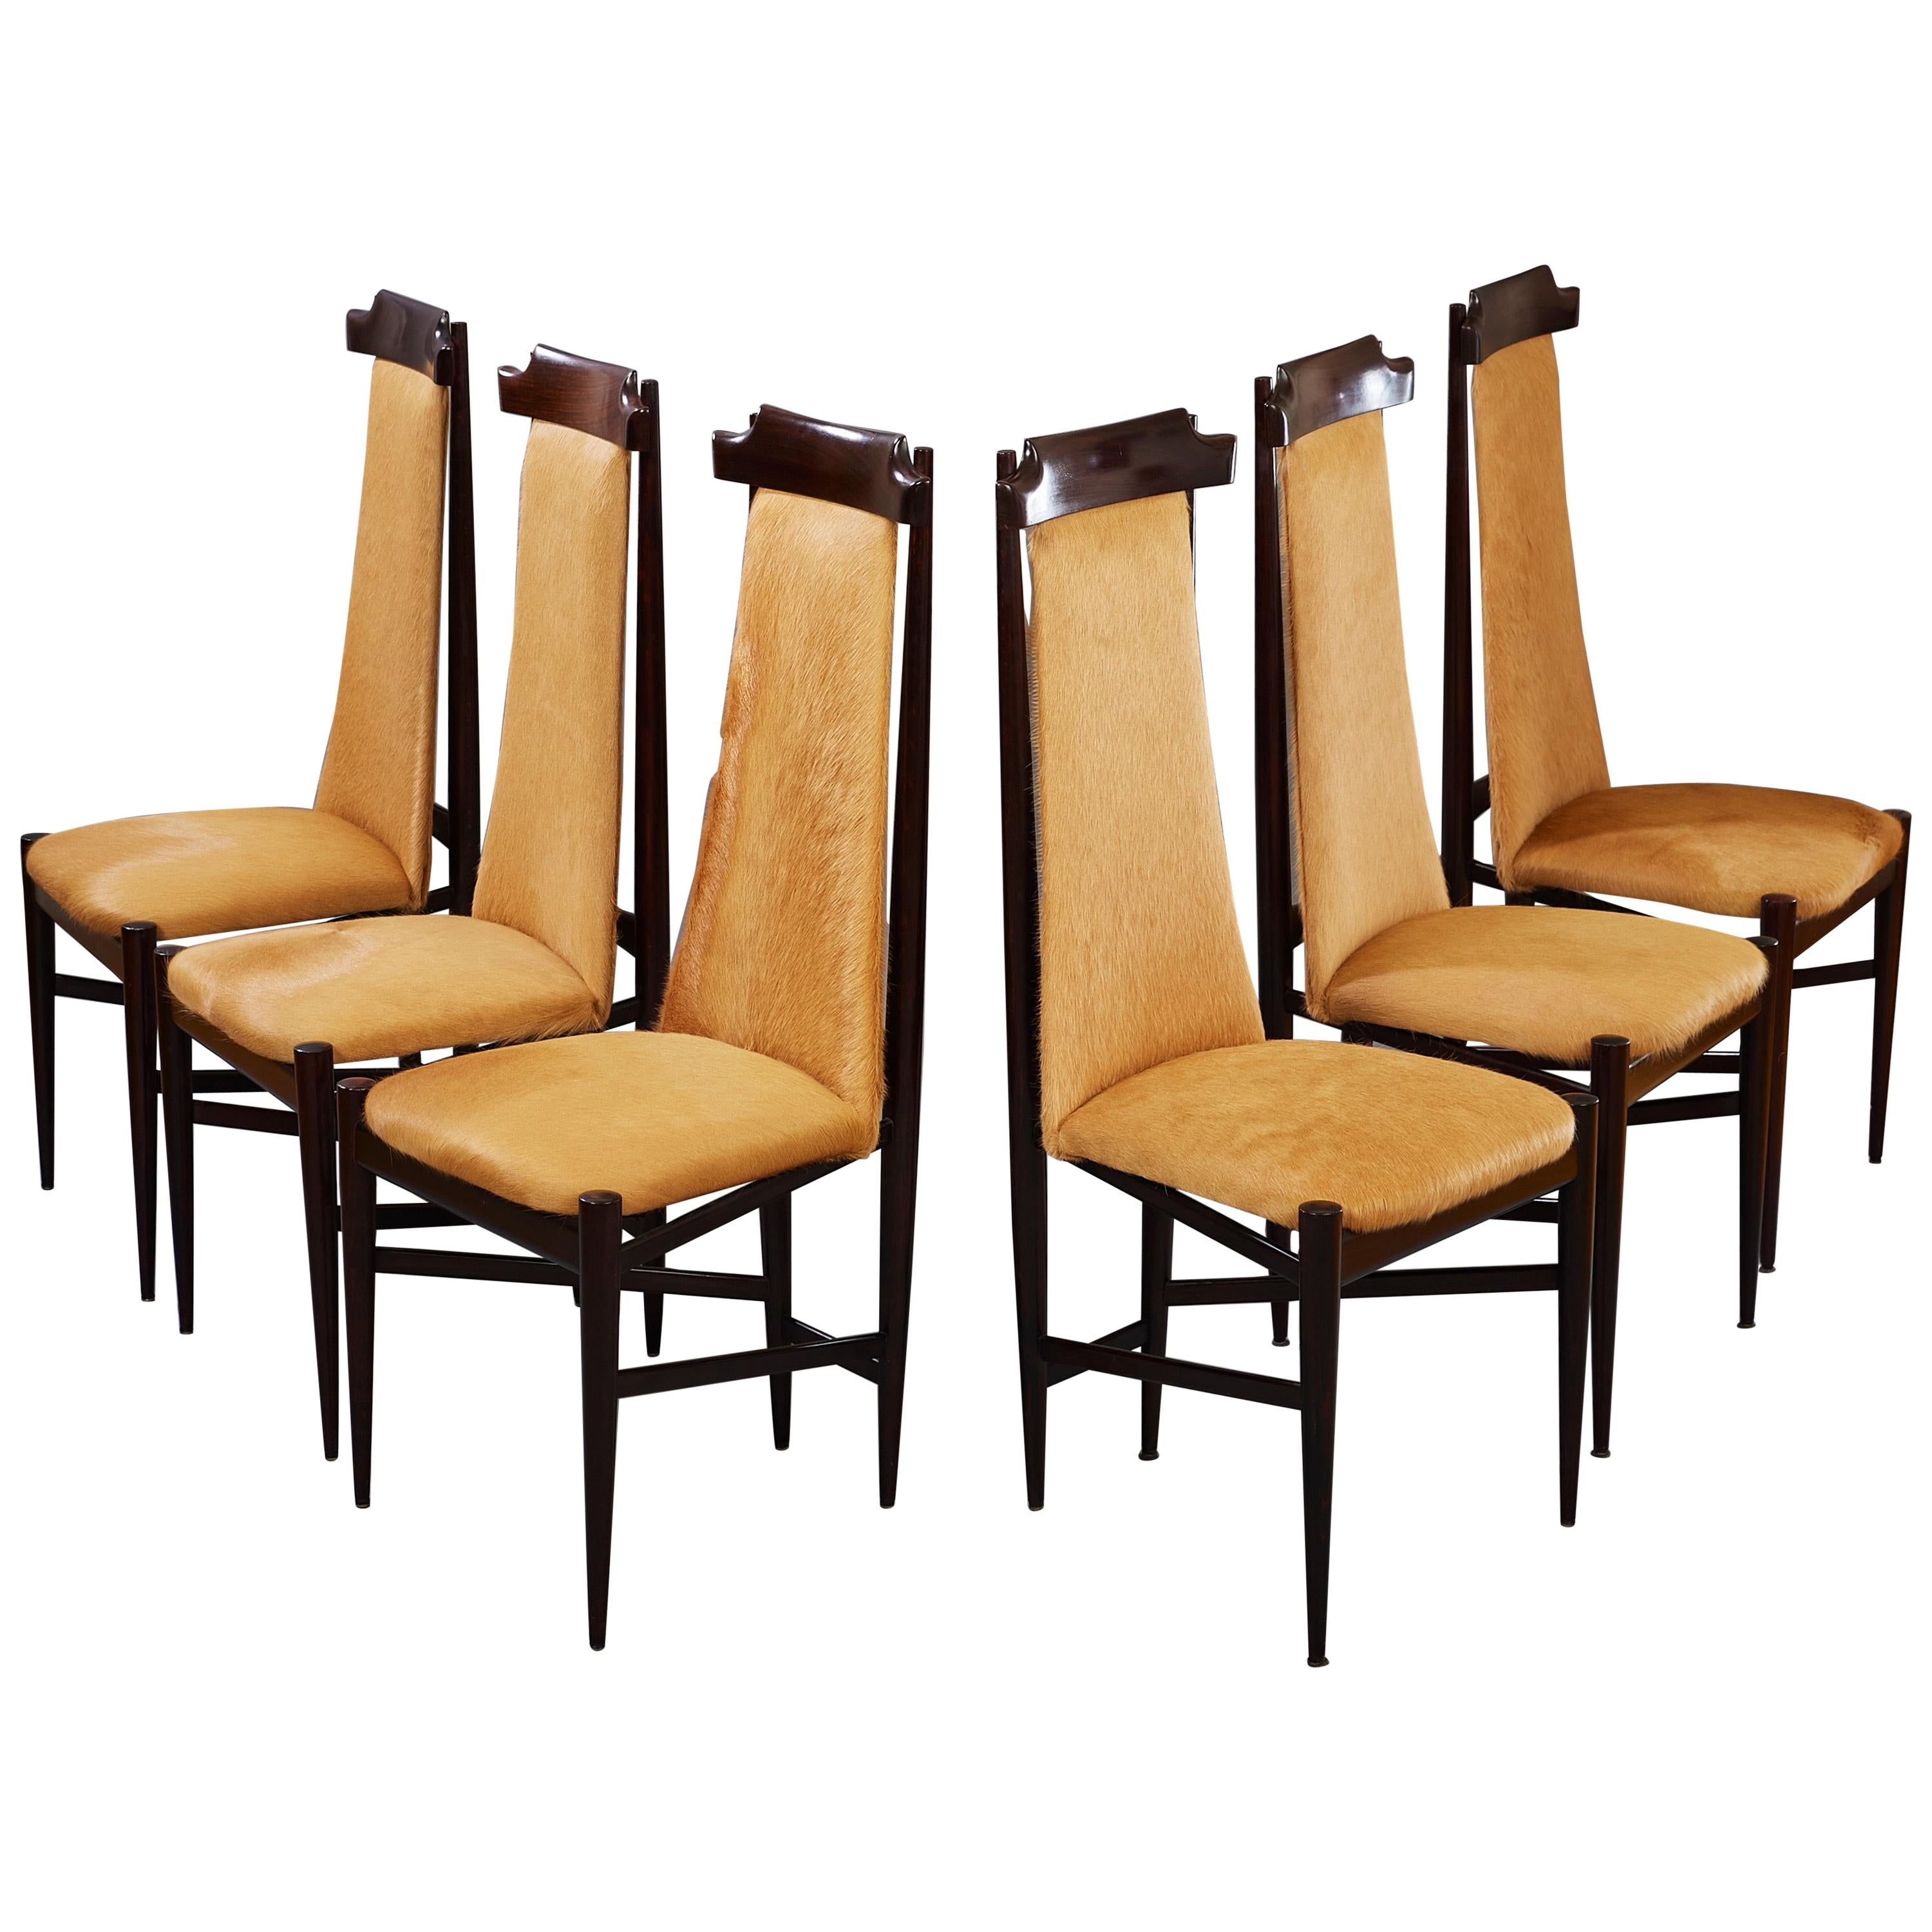 Sergio Rodrigues Six Dining Chairs in Wood and Tan Cowhide, Brazil, 1960s